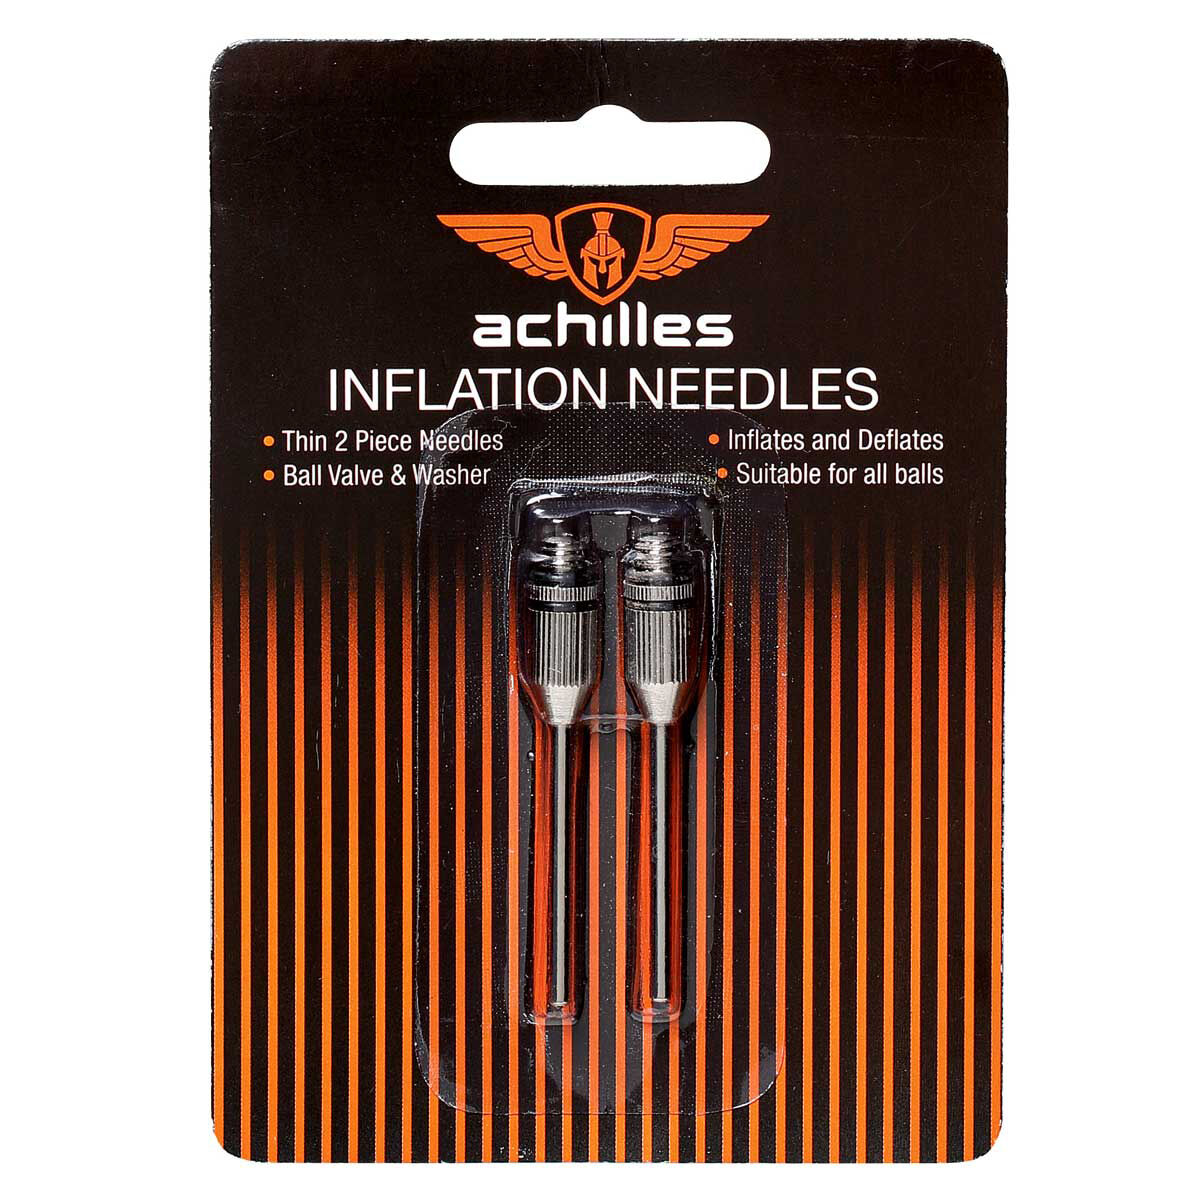 2 x SPARE NEEDLES FOR INFLATING FOOTBALLS **FREE P&P** 